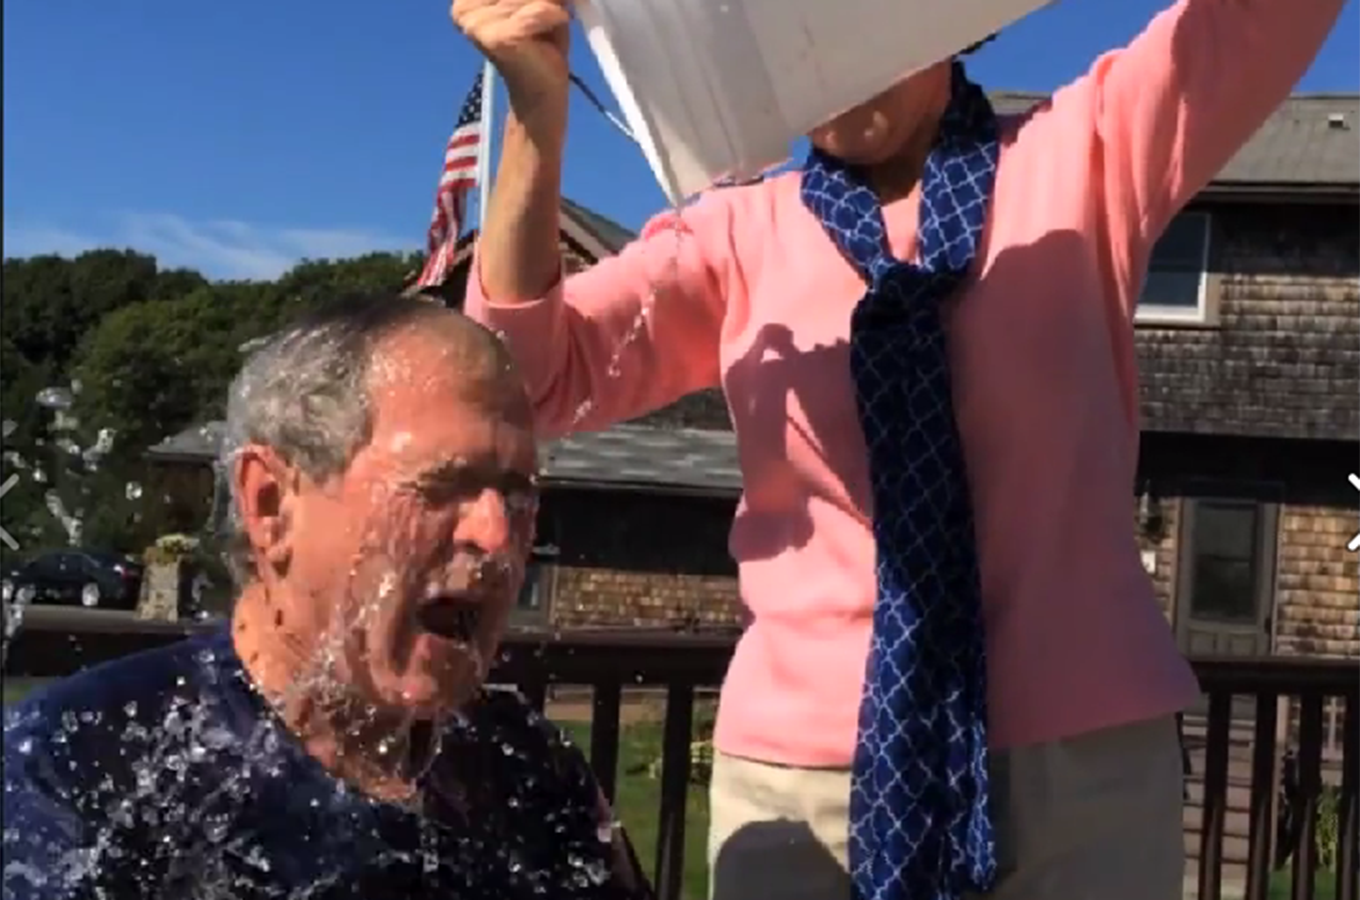 Even George Bush got involved with the Ice Bucket Challenge